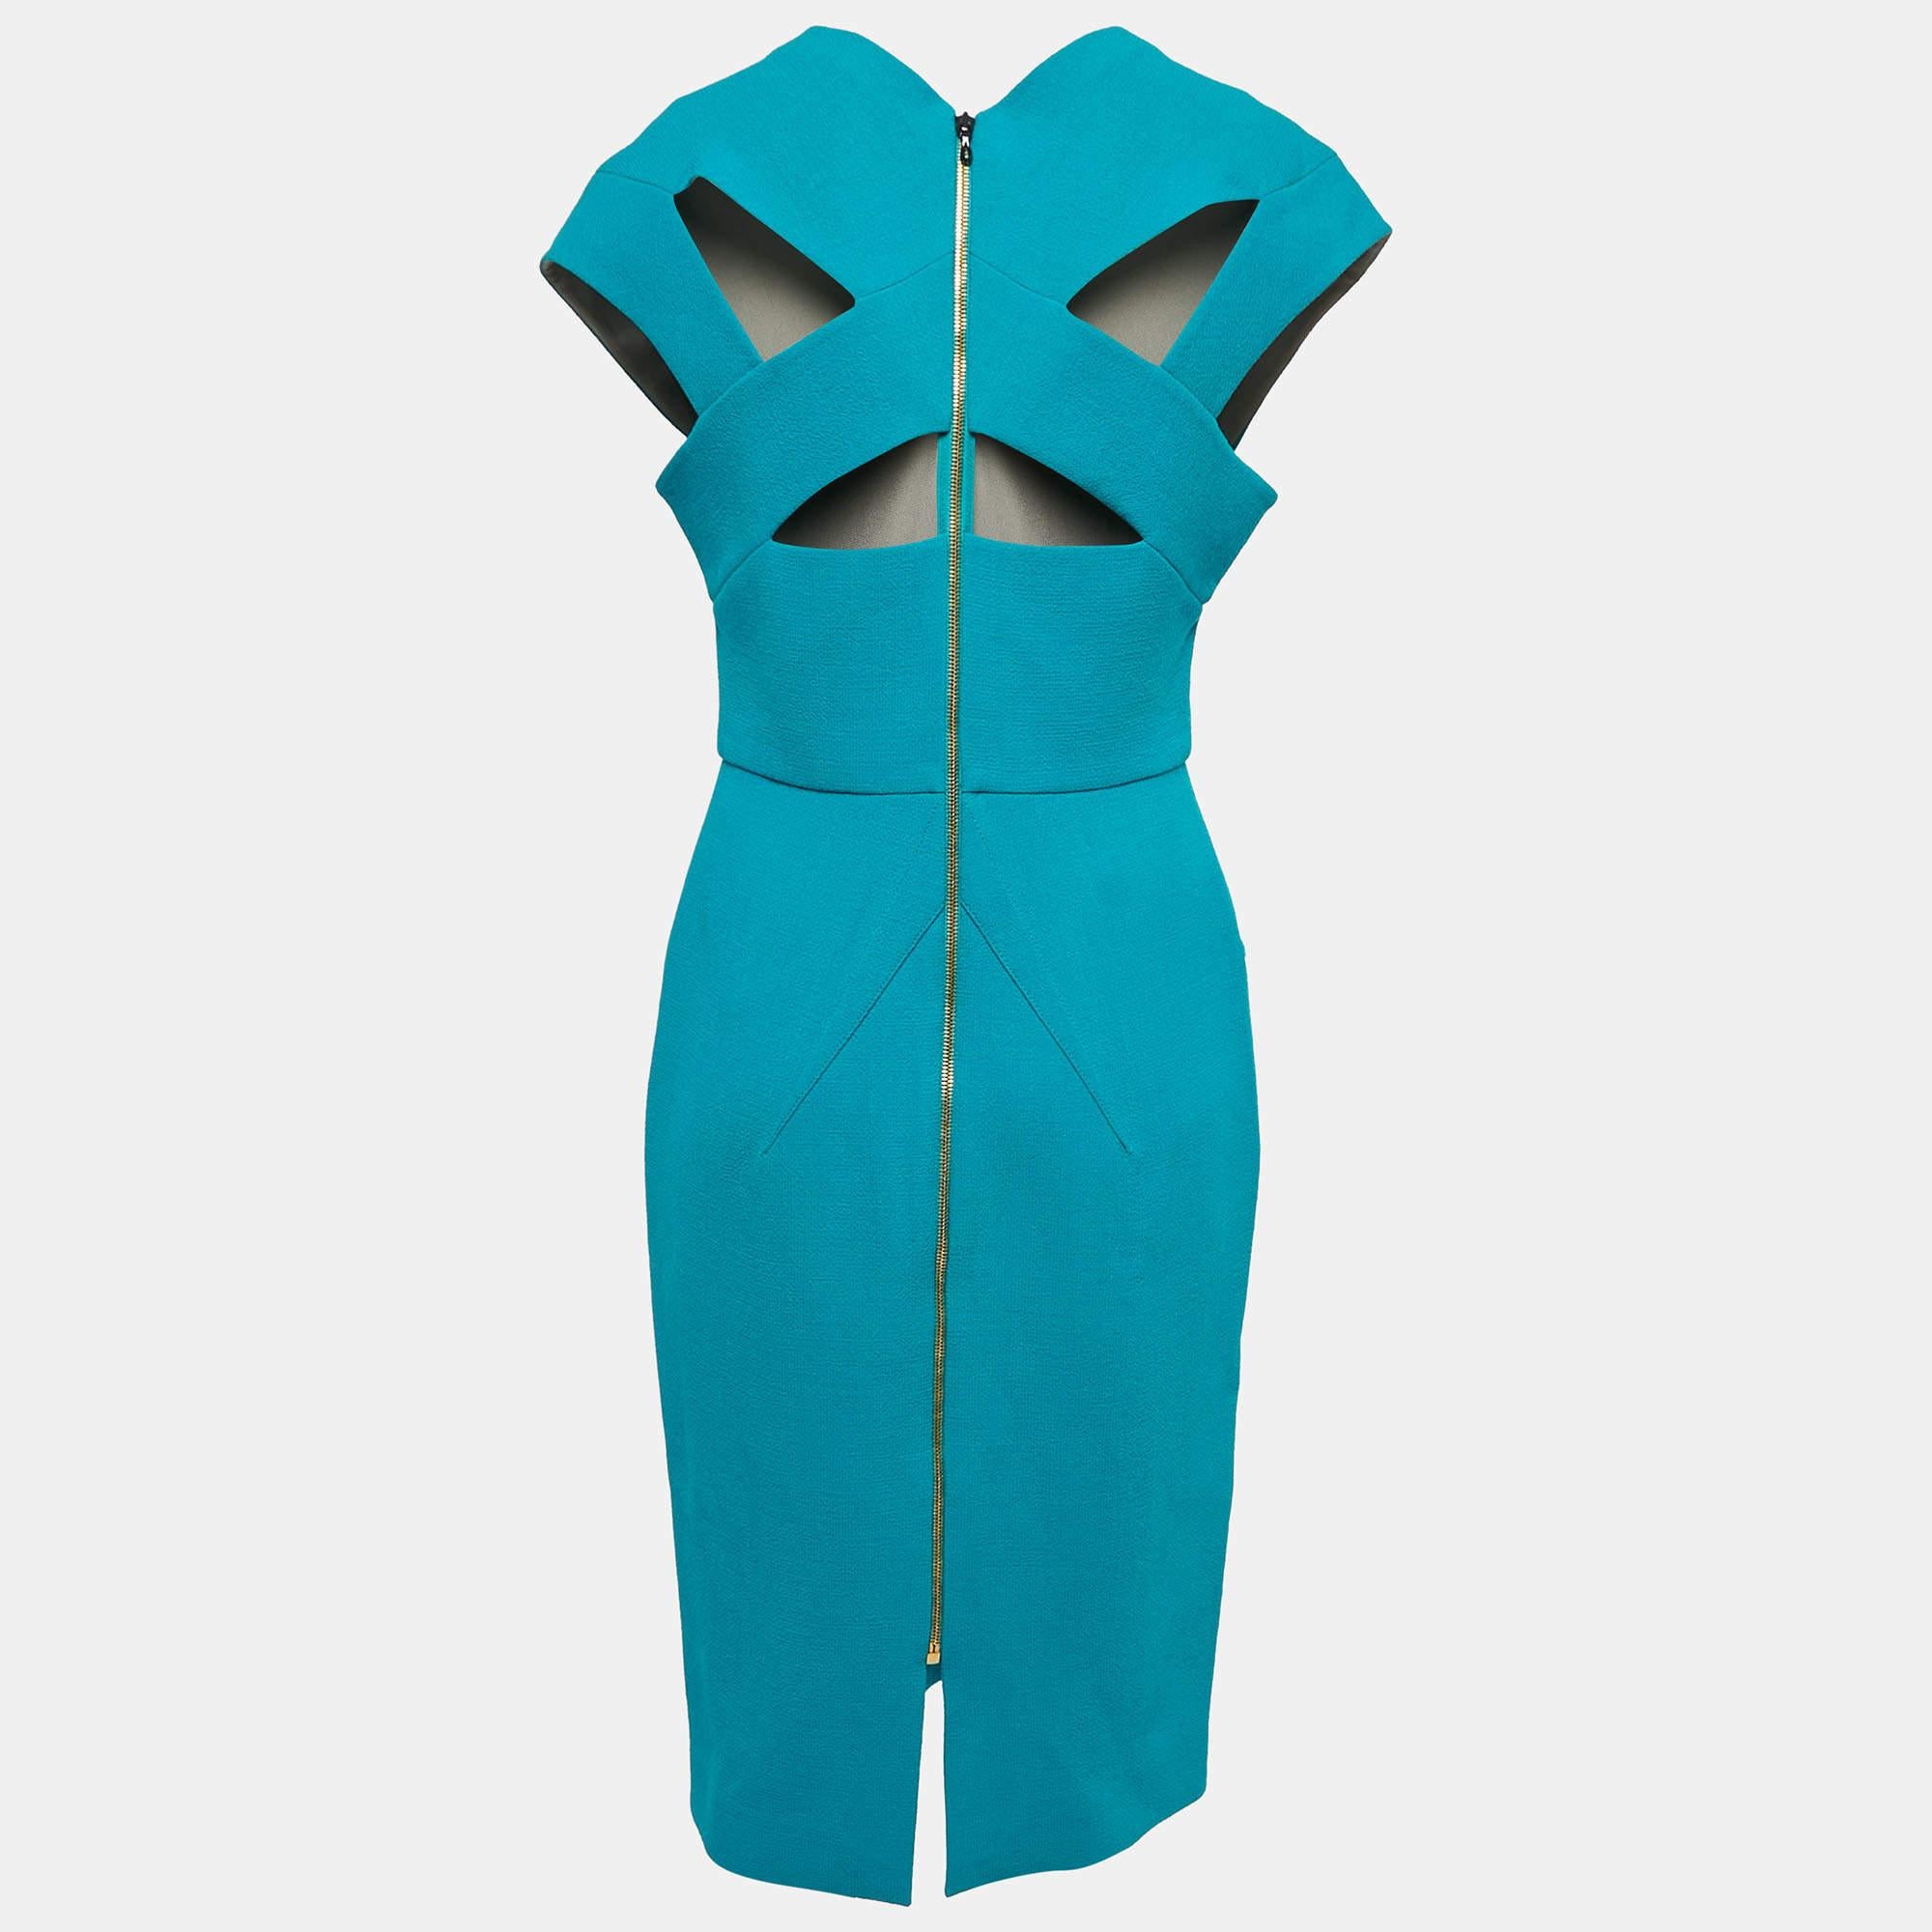 The Roland Mouret Egerton dress is an exquisite piece that combines elegance and sophistication. Crafted from luxurious wool crepe, it features a flattering V-neckline and a timeless sheath silhouette, making it a perfect choice for special